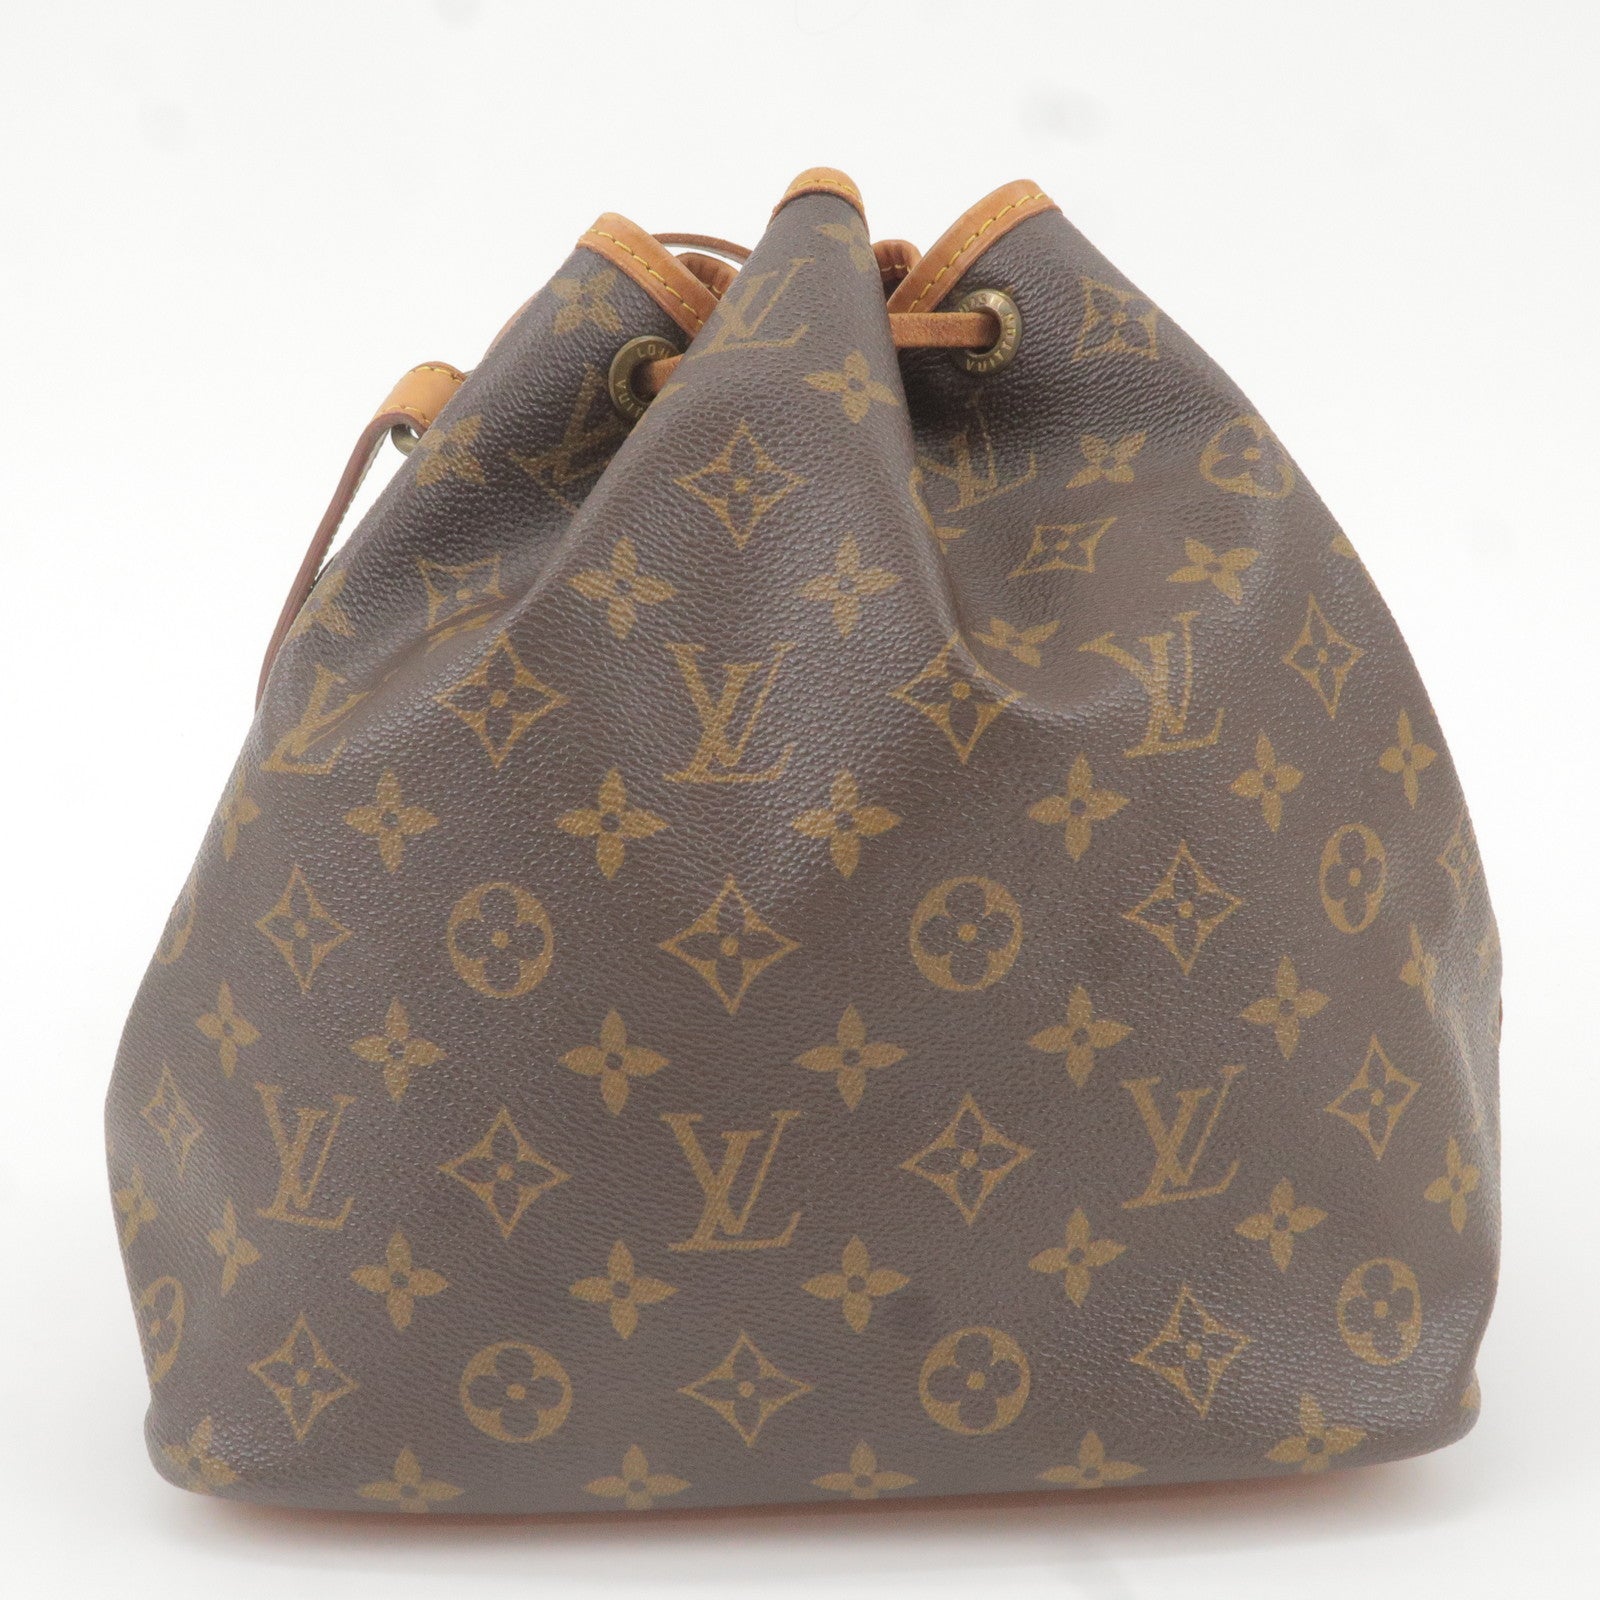 Sold at Auction: A Louis Vuitton Monogram Flandrin Tote